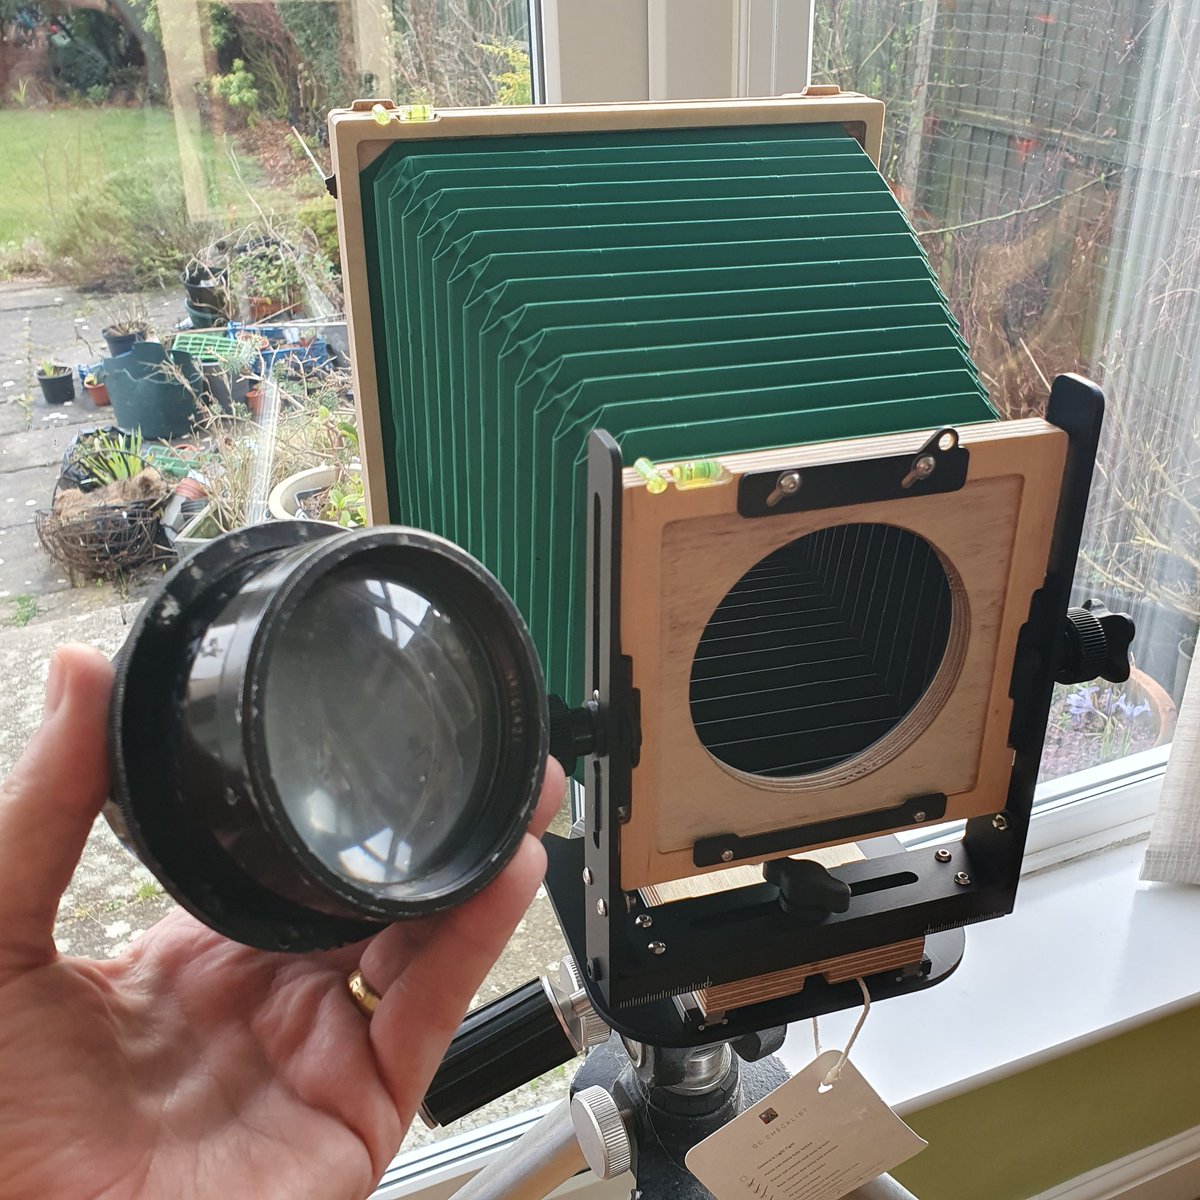 In today's post bag, a customer sent a 5x7 #Intrepid large format camera and an Air Ministry 8' f/2.9 lens for a custom lens board. #ForsterUK